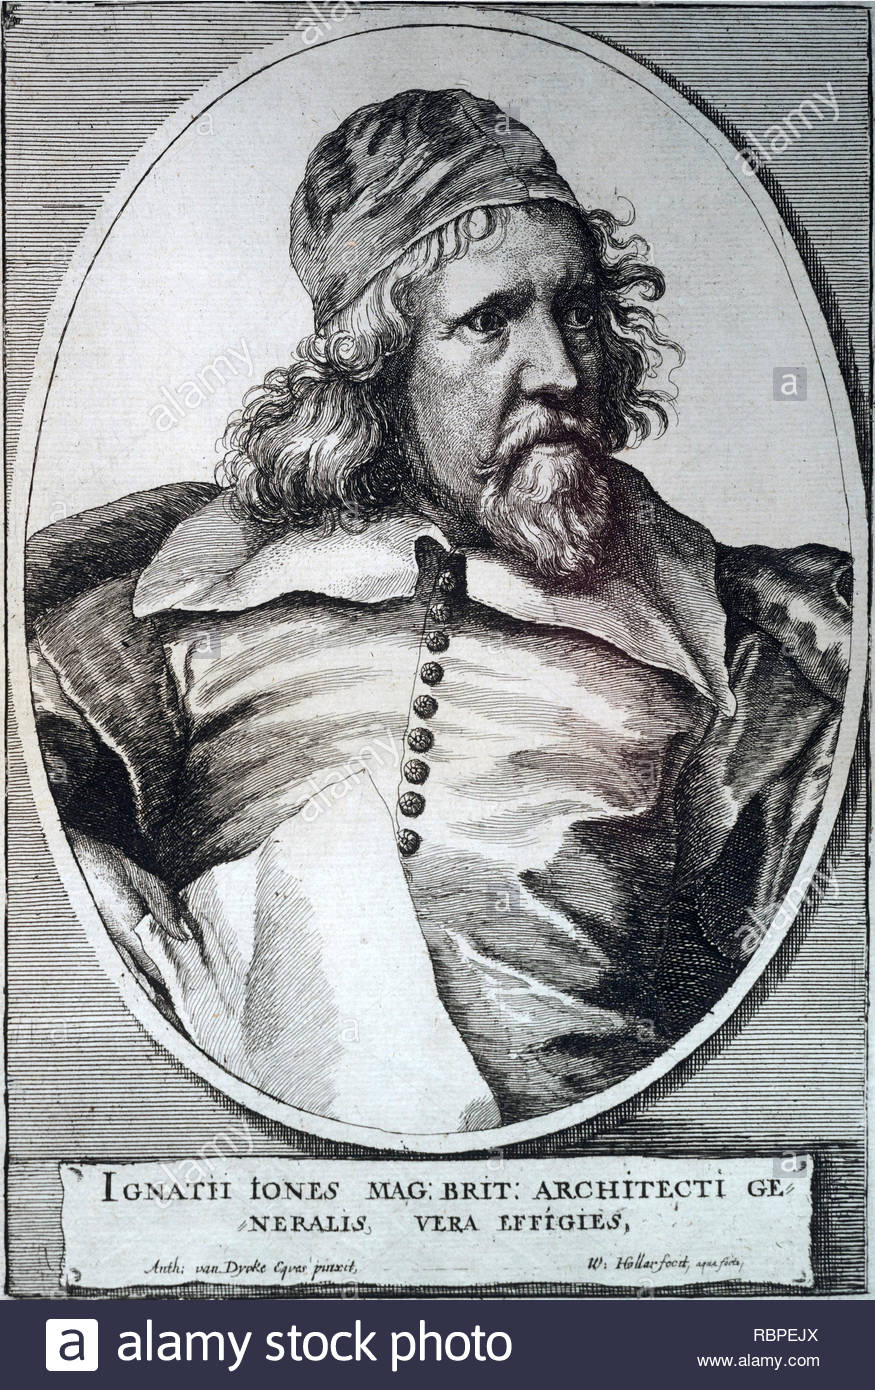 Inigo Jones portrait, 1573 – 1652, was the first significant English architect in the early modern period, and the first to employ Vitruvian rules of proportion and symmetry in his buildings, etching by Bohemian etcher Wenceslaus Hollar from 1600s Stock Photo